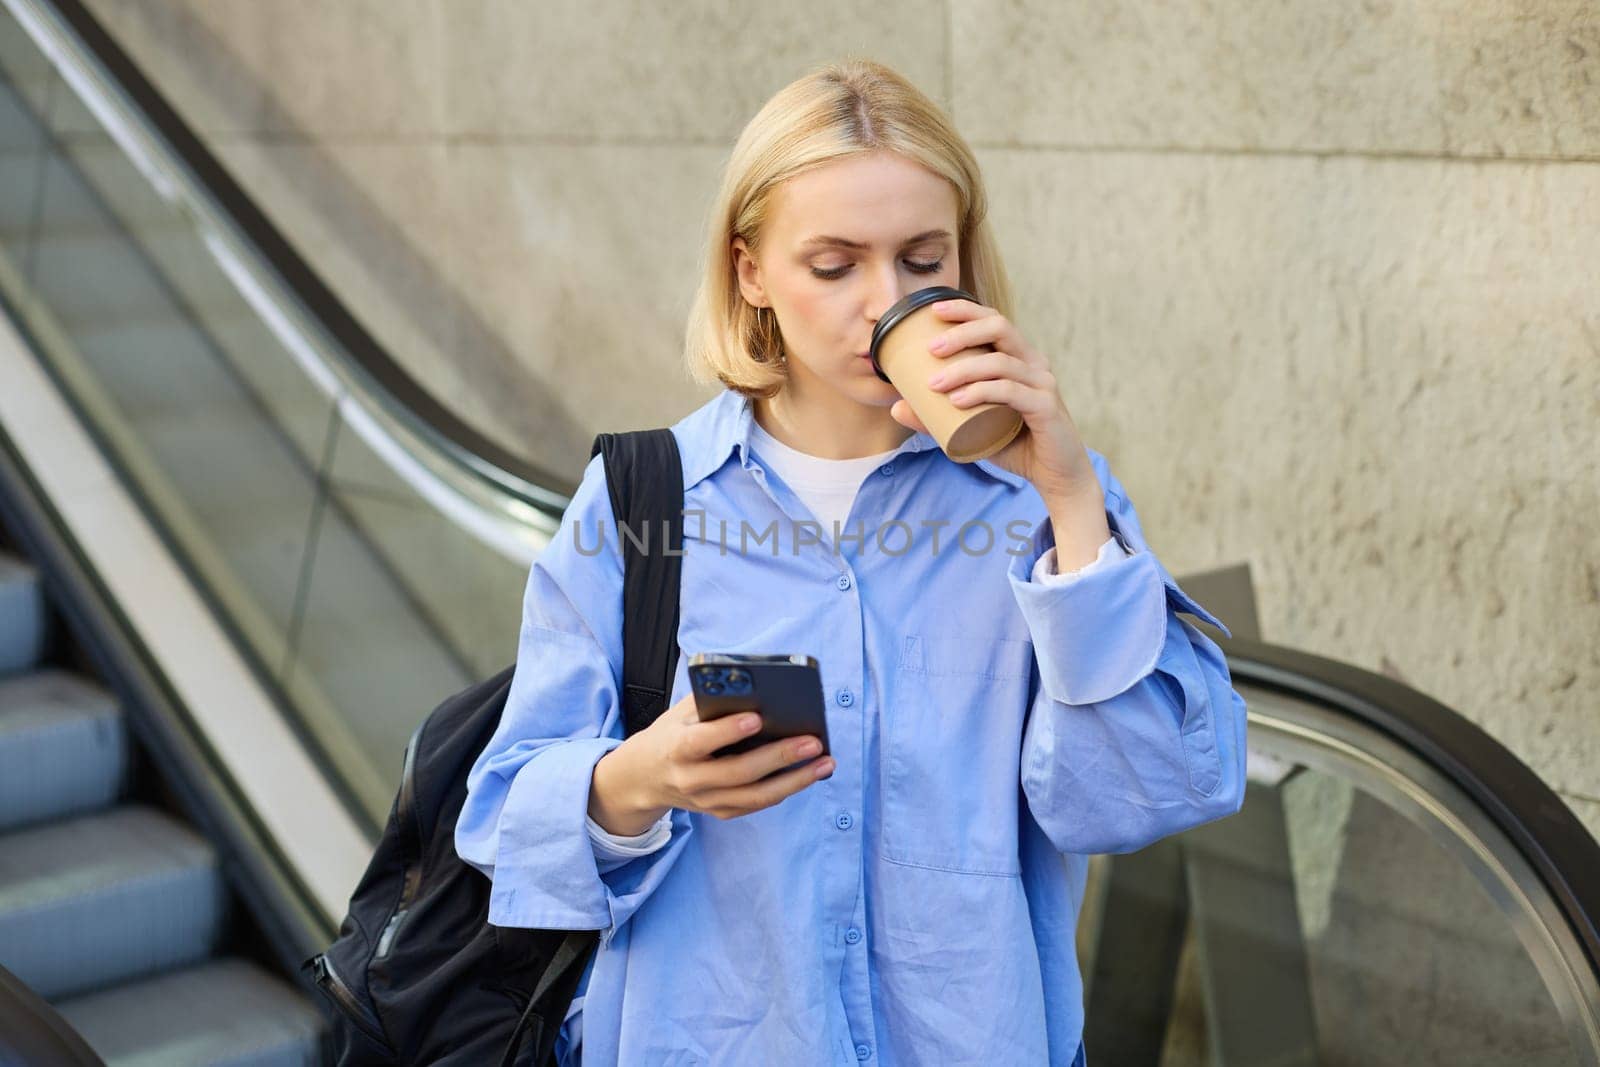 A happy, elegant businesswoman descending the escalator and holding takeaway coffee while reading important messages. A woman on the escalator with a phone.